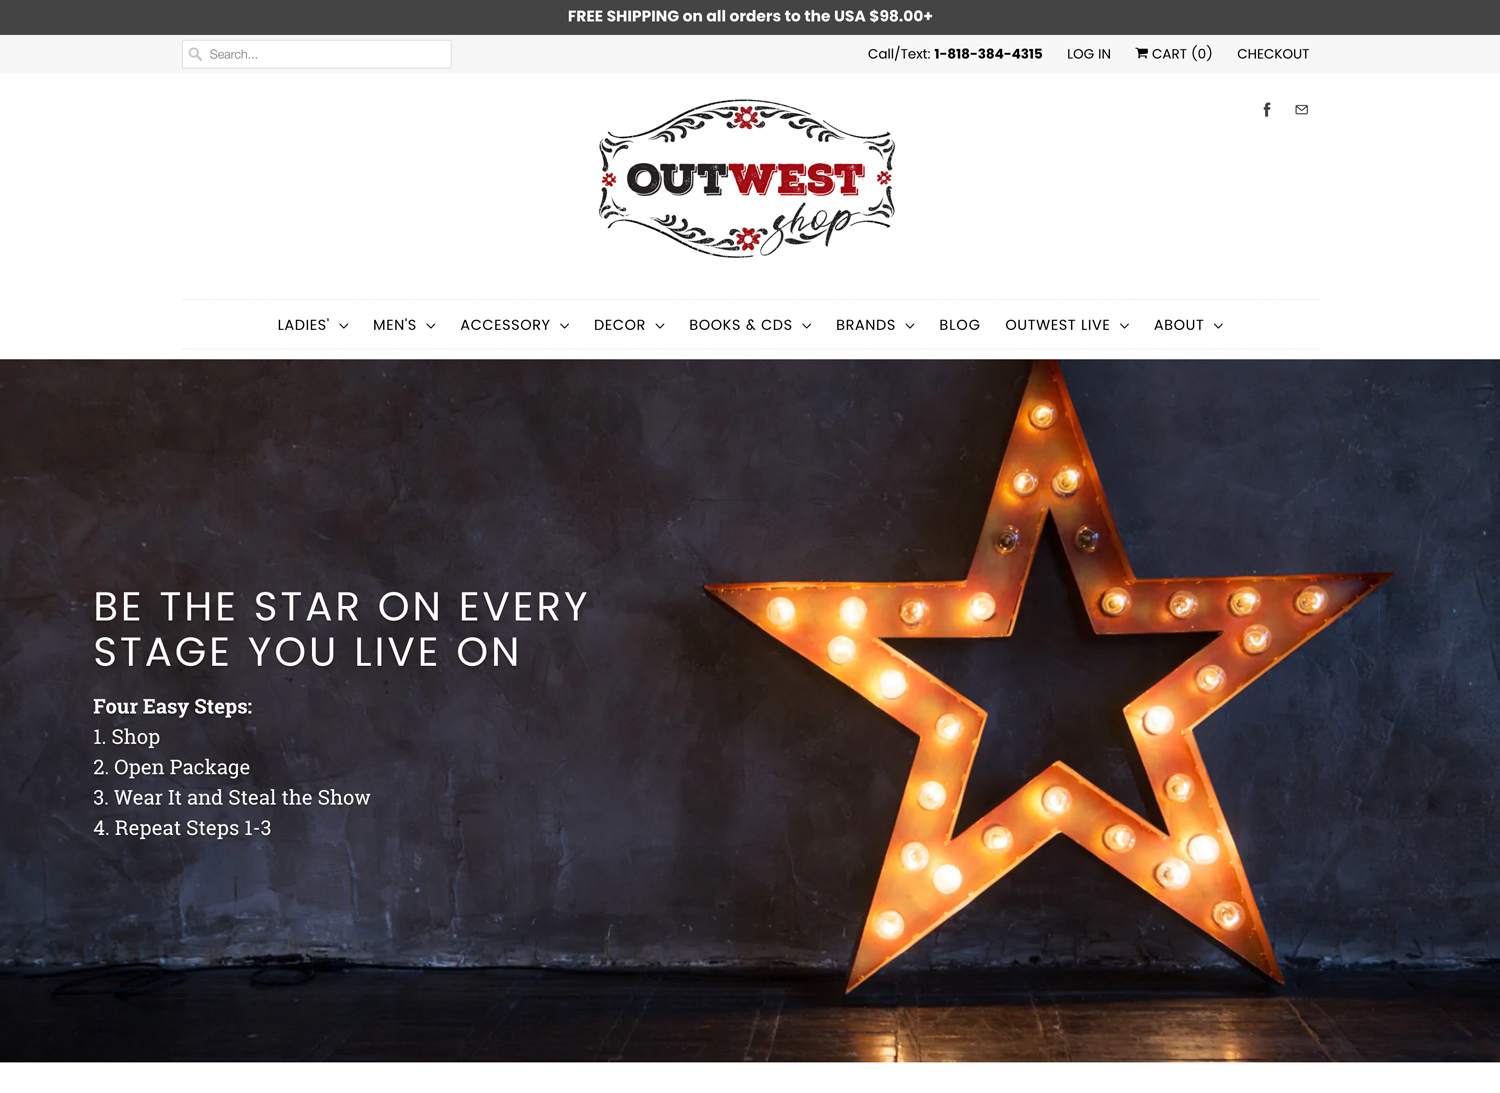 OutWest Shop homepage